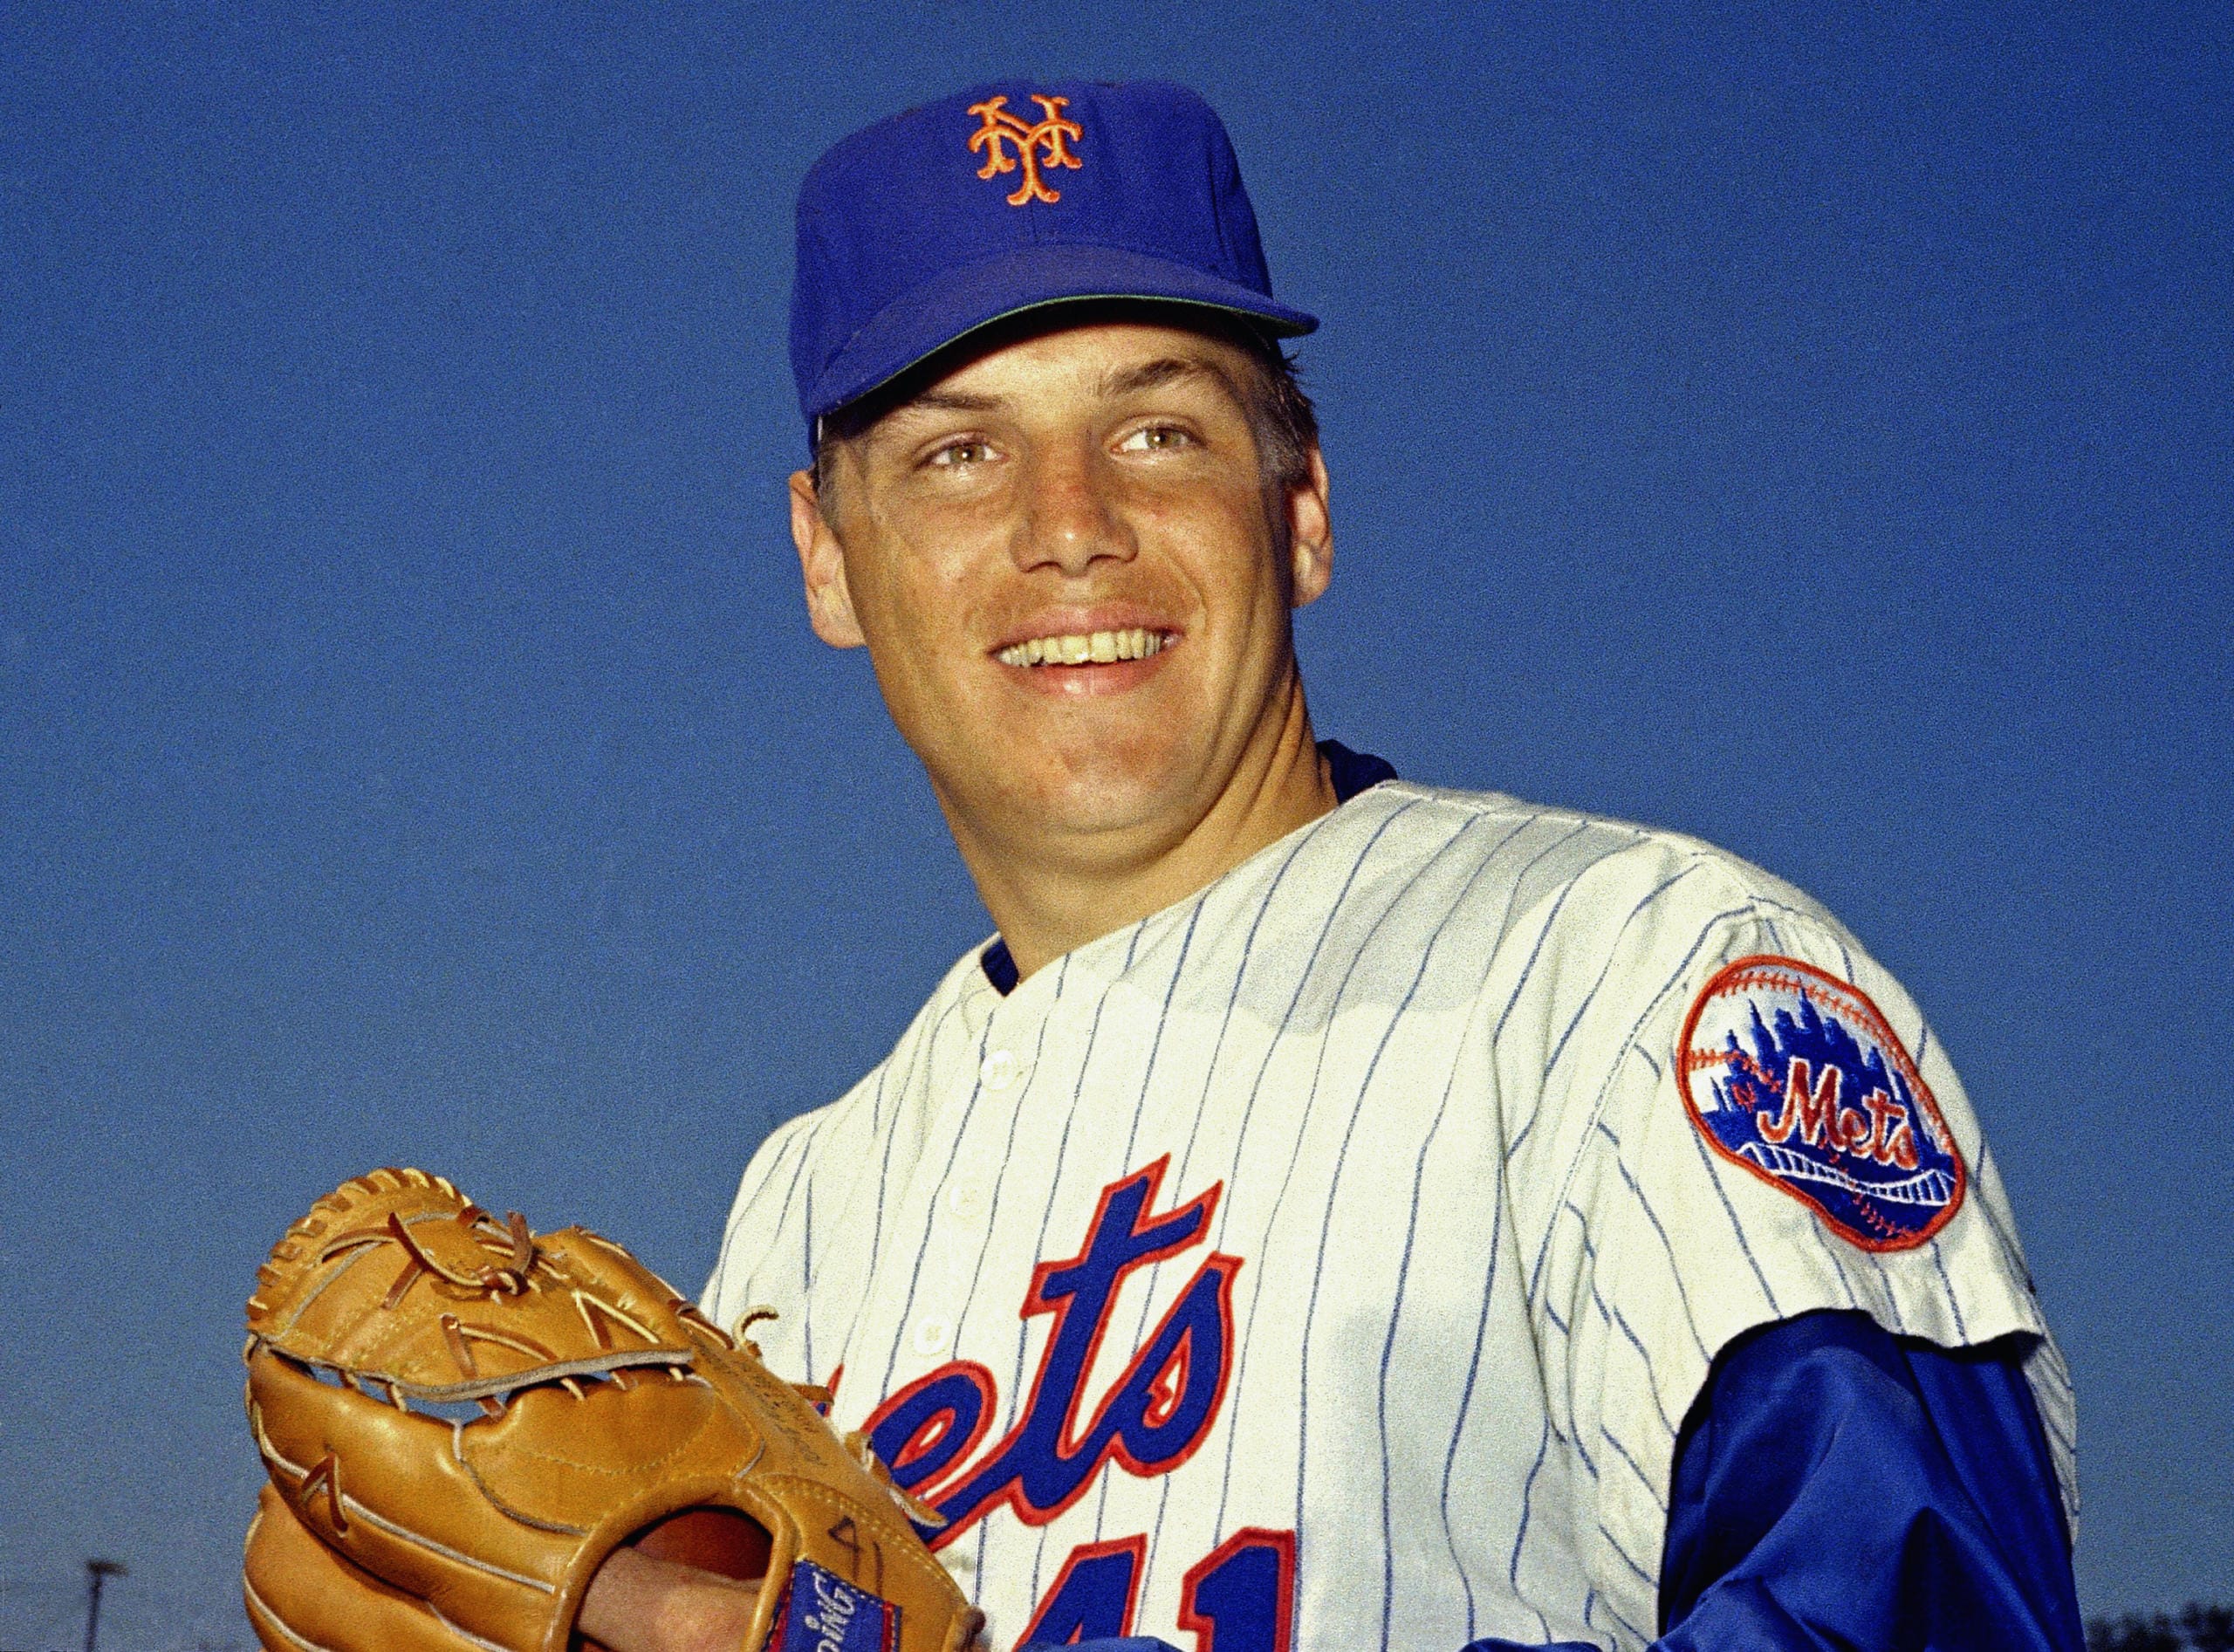 New York Mets pitcher Tom Seaver, pictured here in March 1968, was the galvanizing leader of the Miracle Mets 1969 championship team and a pitcher who personified the rise of expansion teams during an era of radical change for baseball. The Hall of Fame said Wednesday night, Sept. 2, 2020, that Seaver died on Aug. 31 from complications of Lewy body dementia and COVID-19. He was 75.